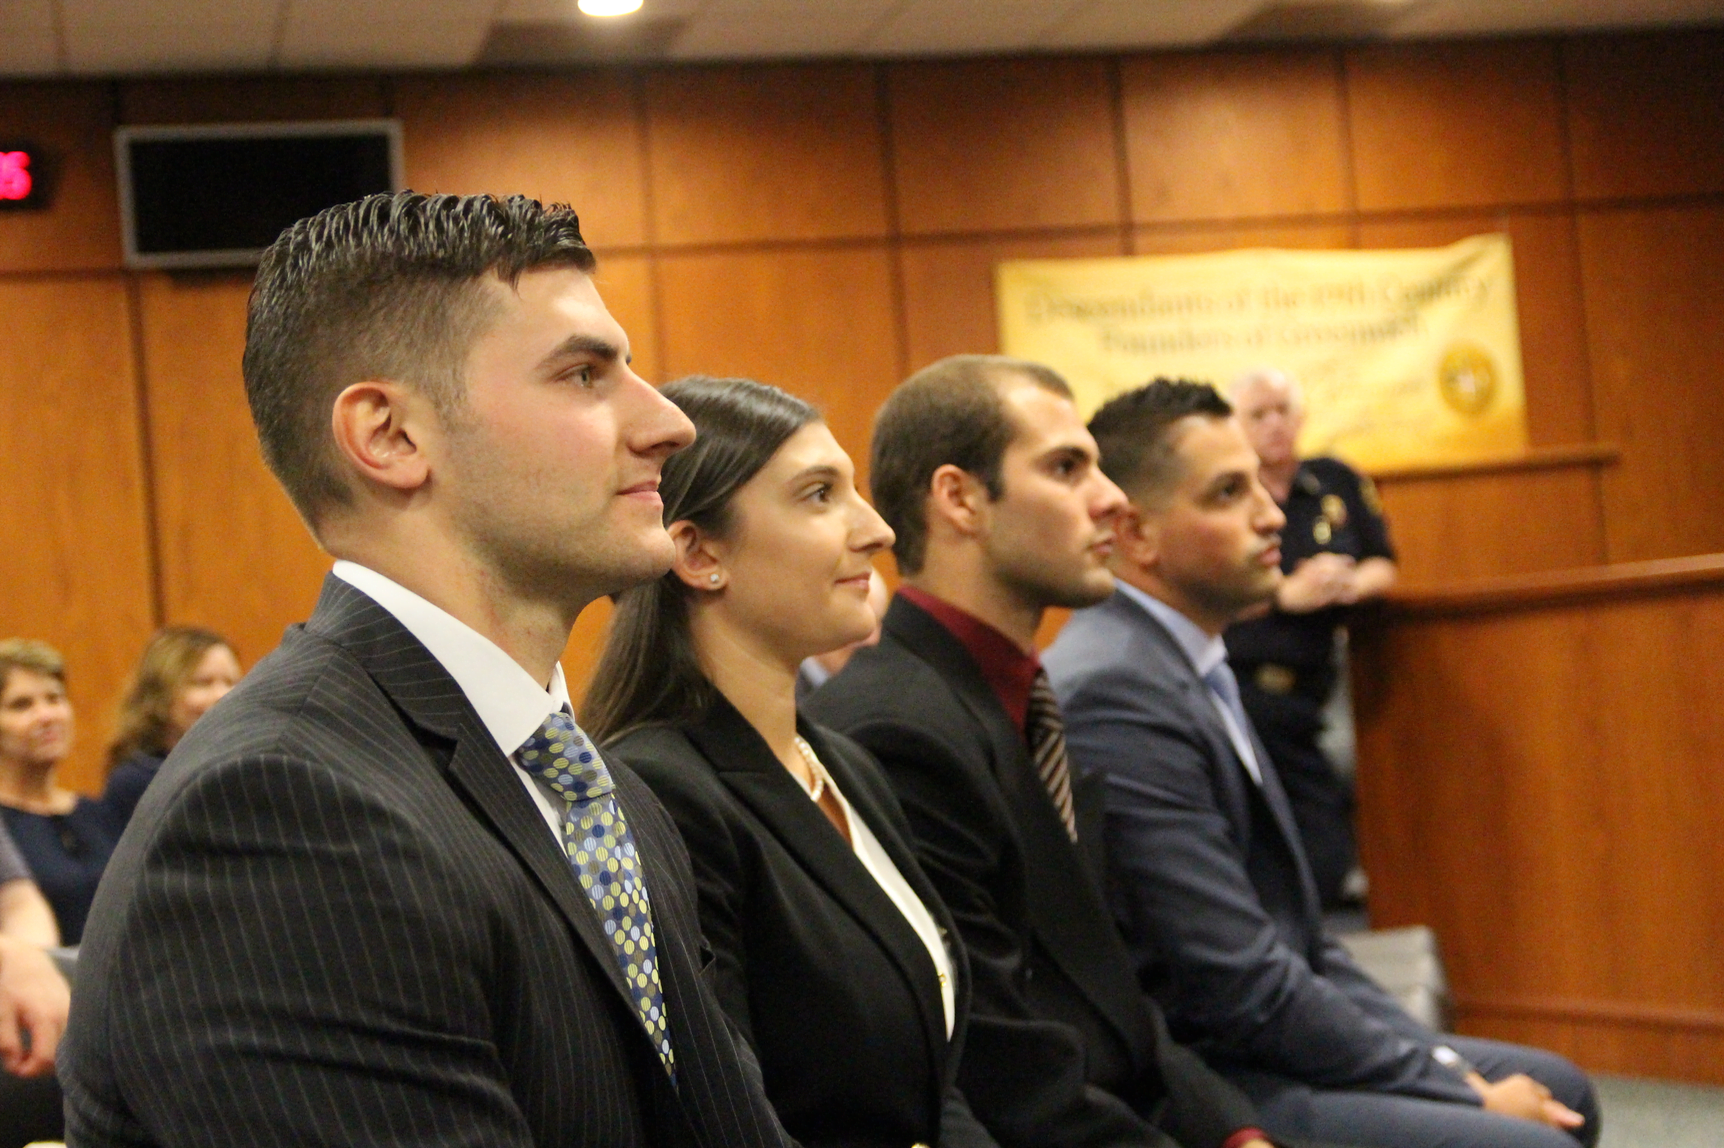 Newly sworn in Greenwich Policle Dept officers Michael Bellairs II, Brooke Lombardo, Nicholas Sarno, and Salvatore Tramontano. July 25, 2019 Photo: Leslie Yager